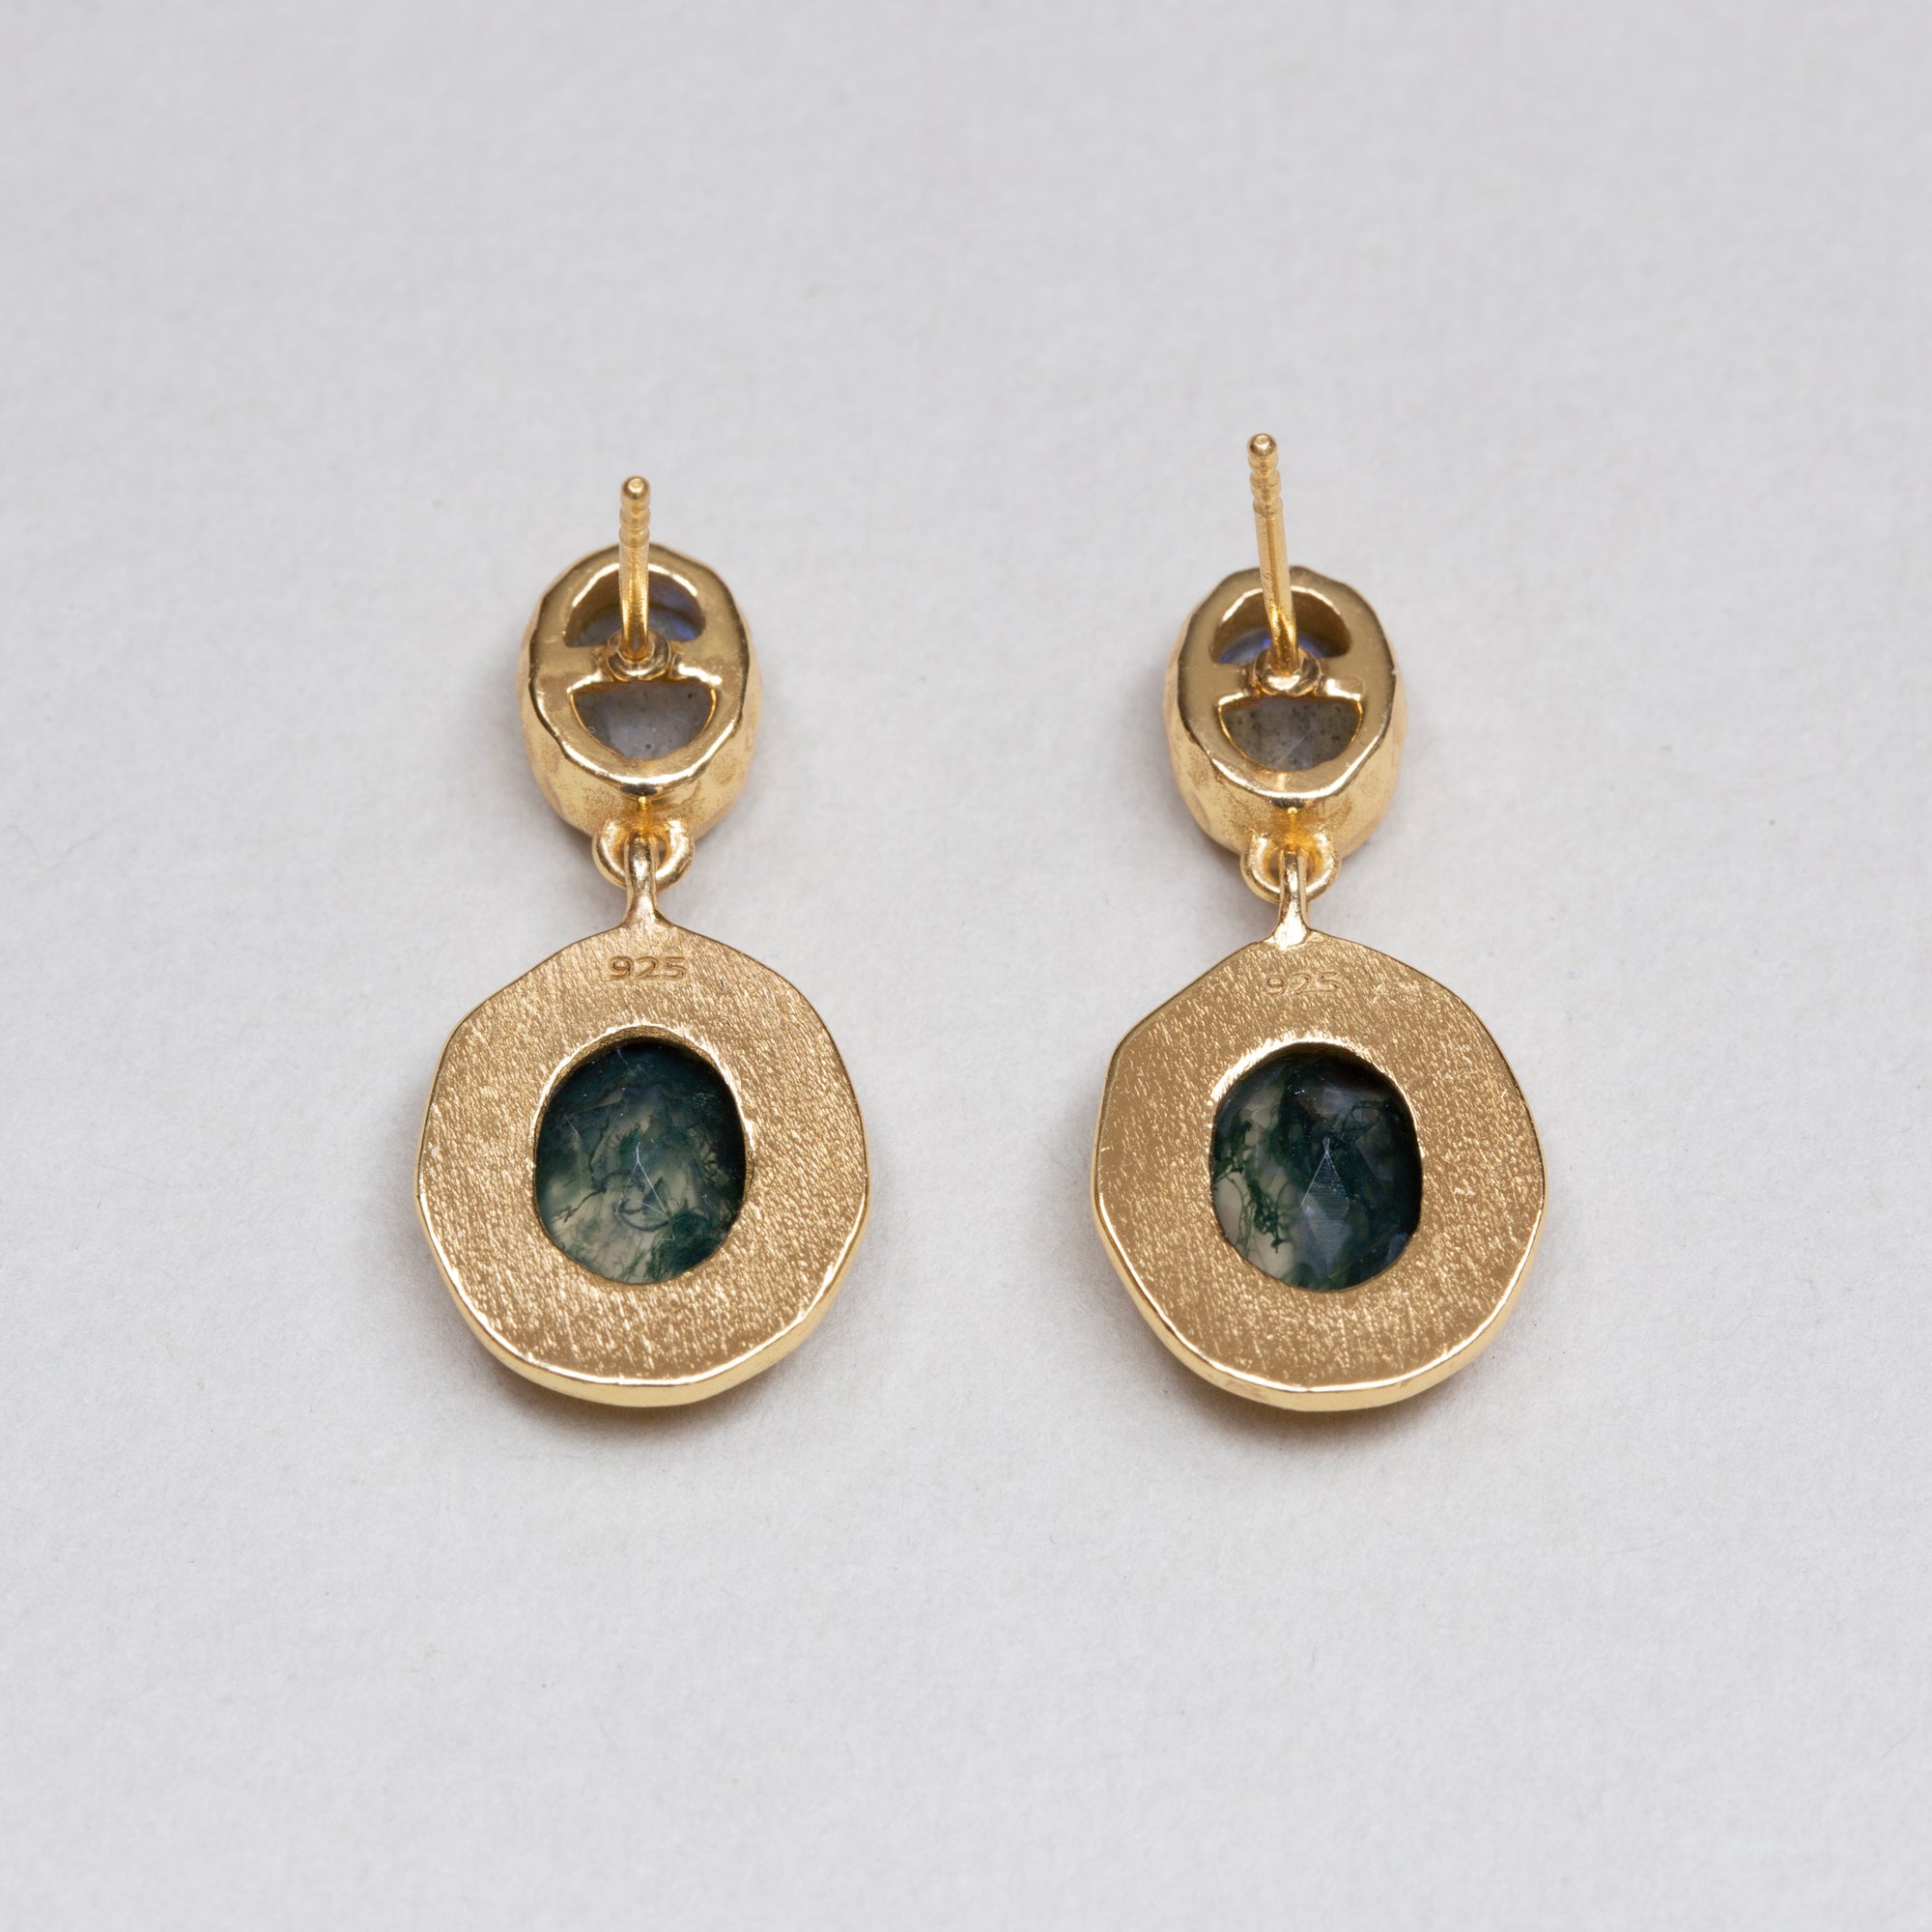 Gold Labradorite and Moss Agate Drop Stud Earrings